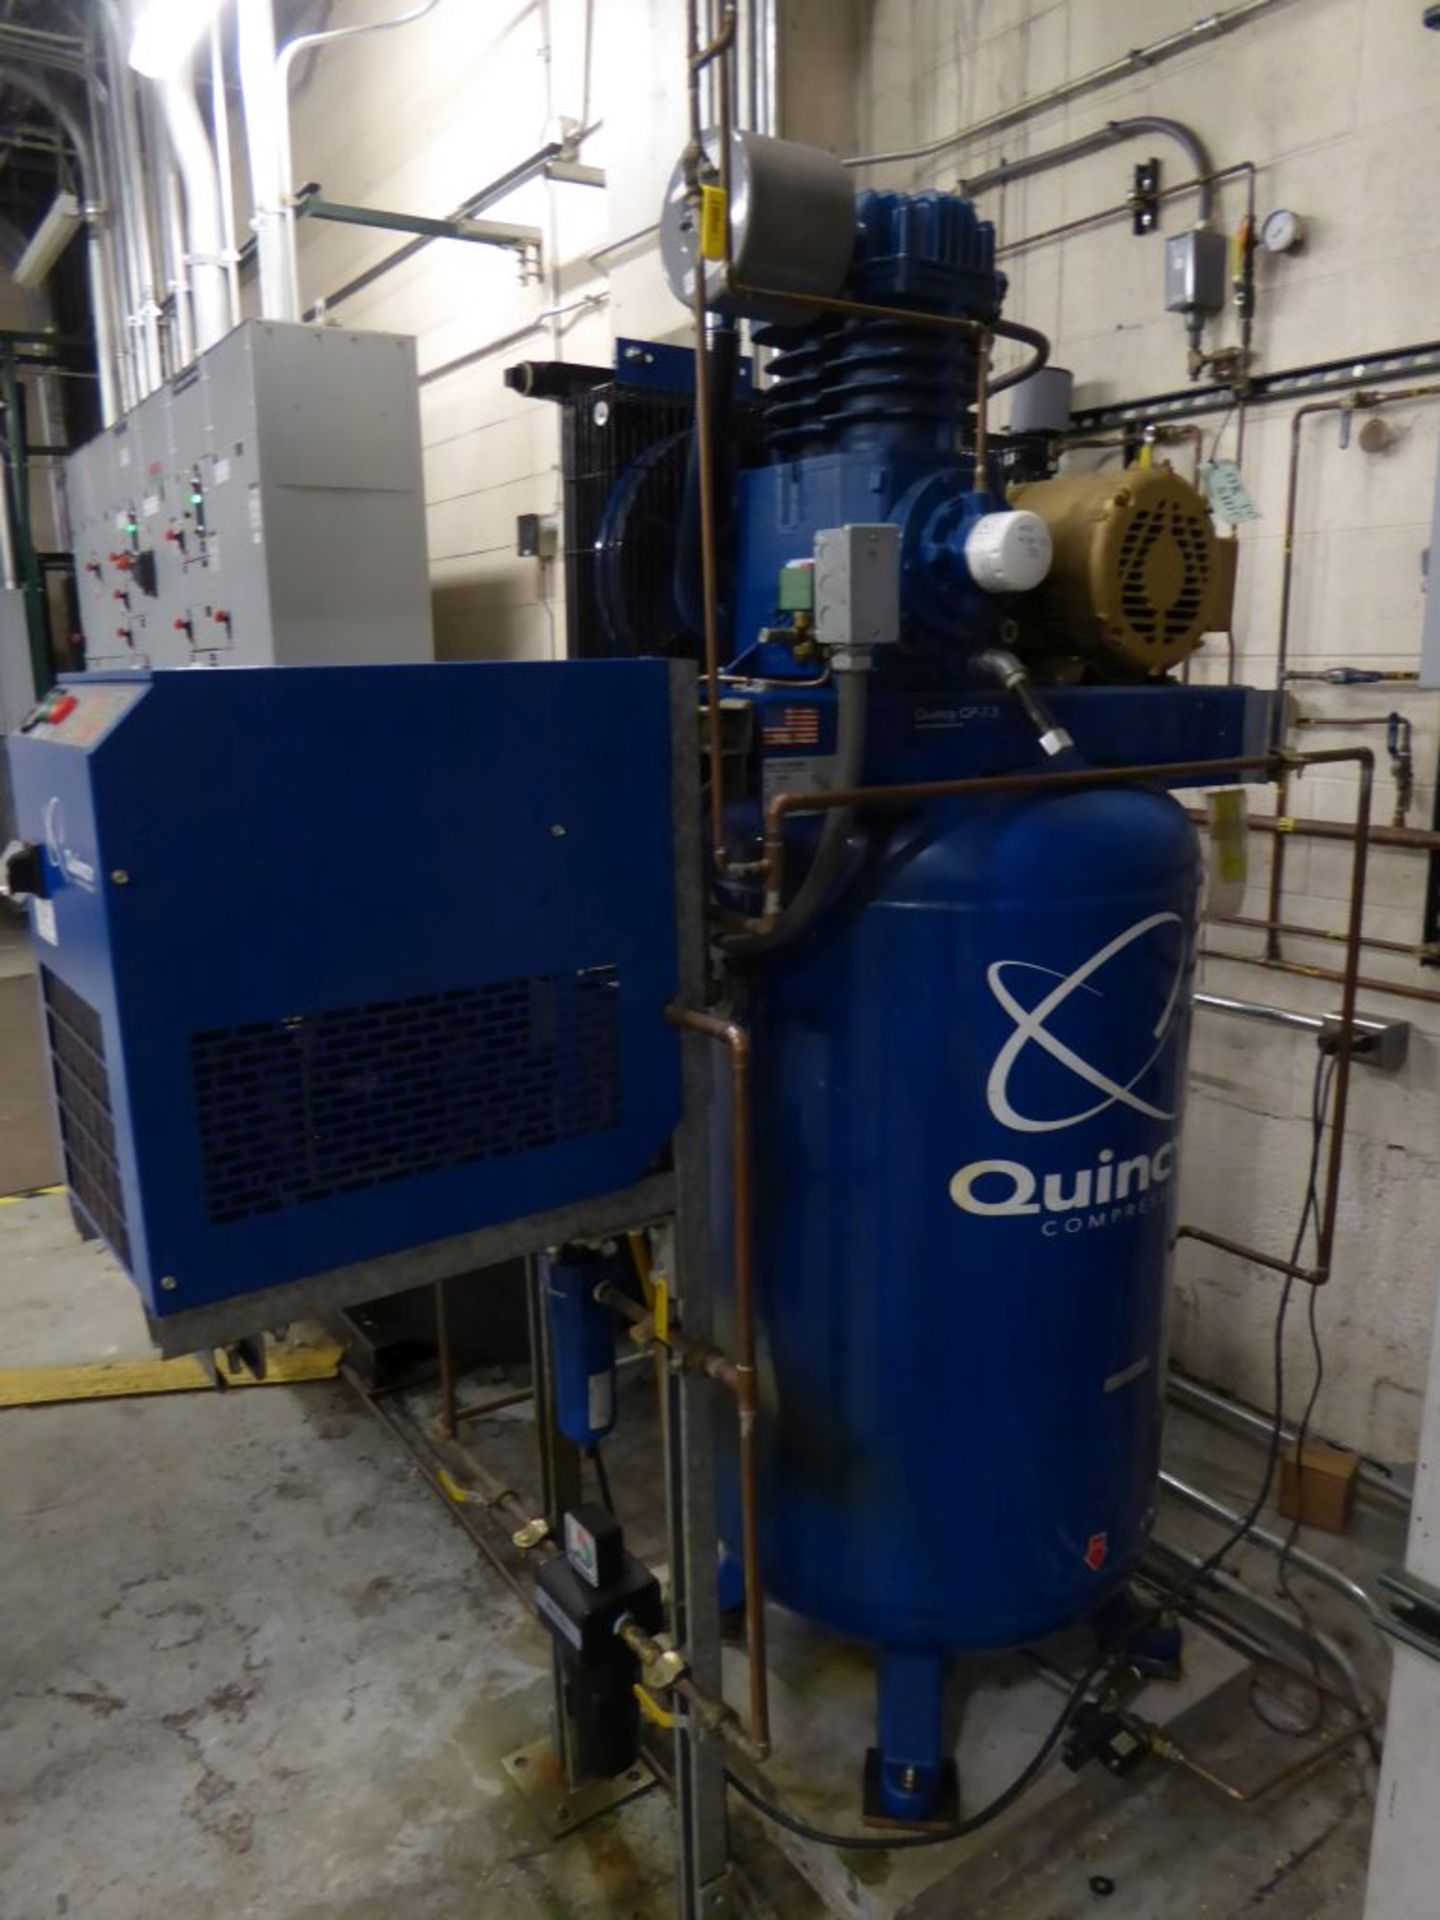 Charlotte, NC - 2015 Quincy QP 7.5 Compressor - Image 2 of 6